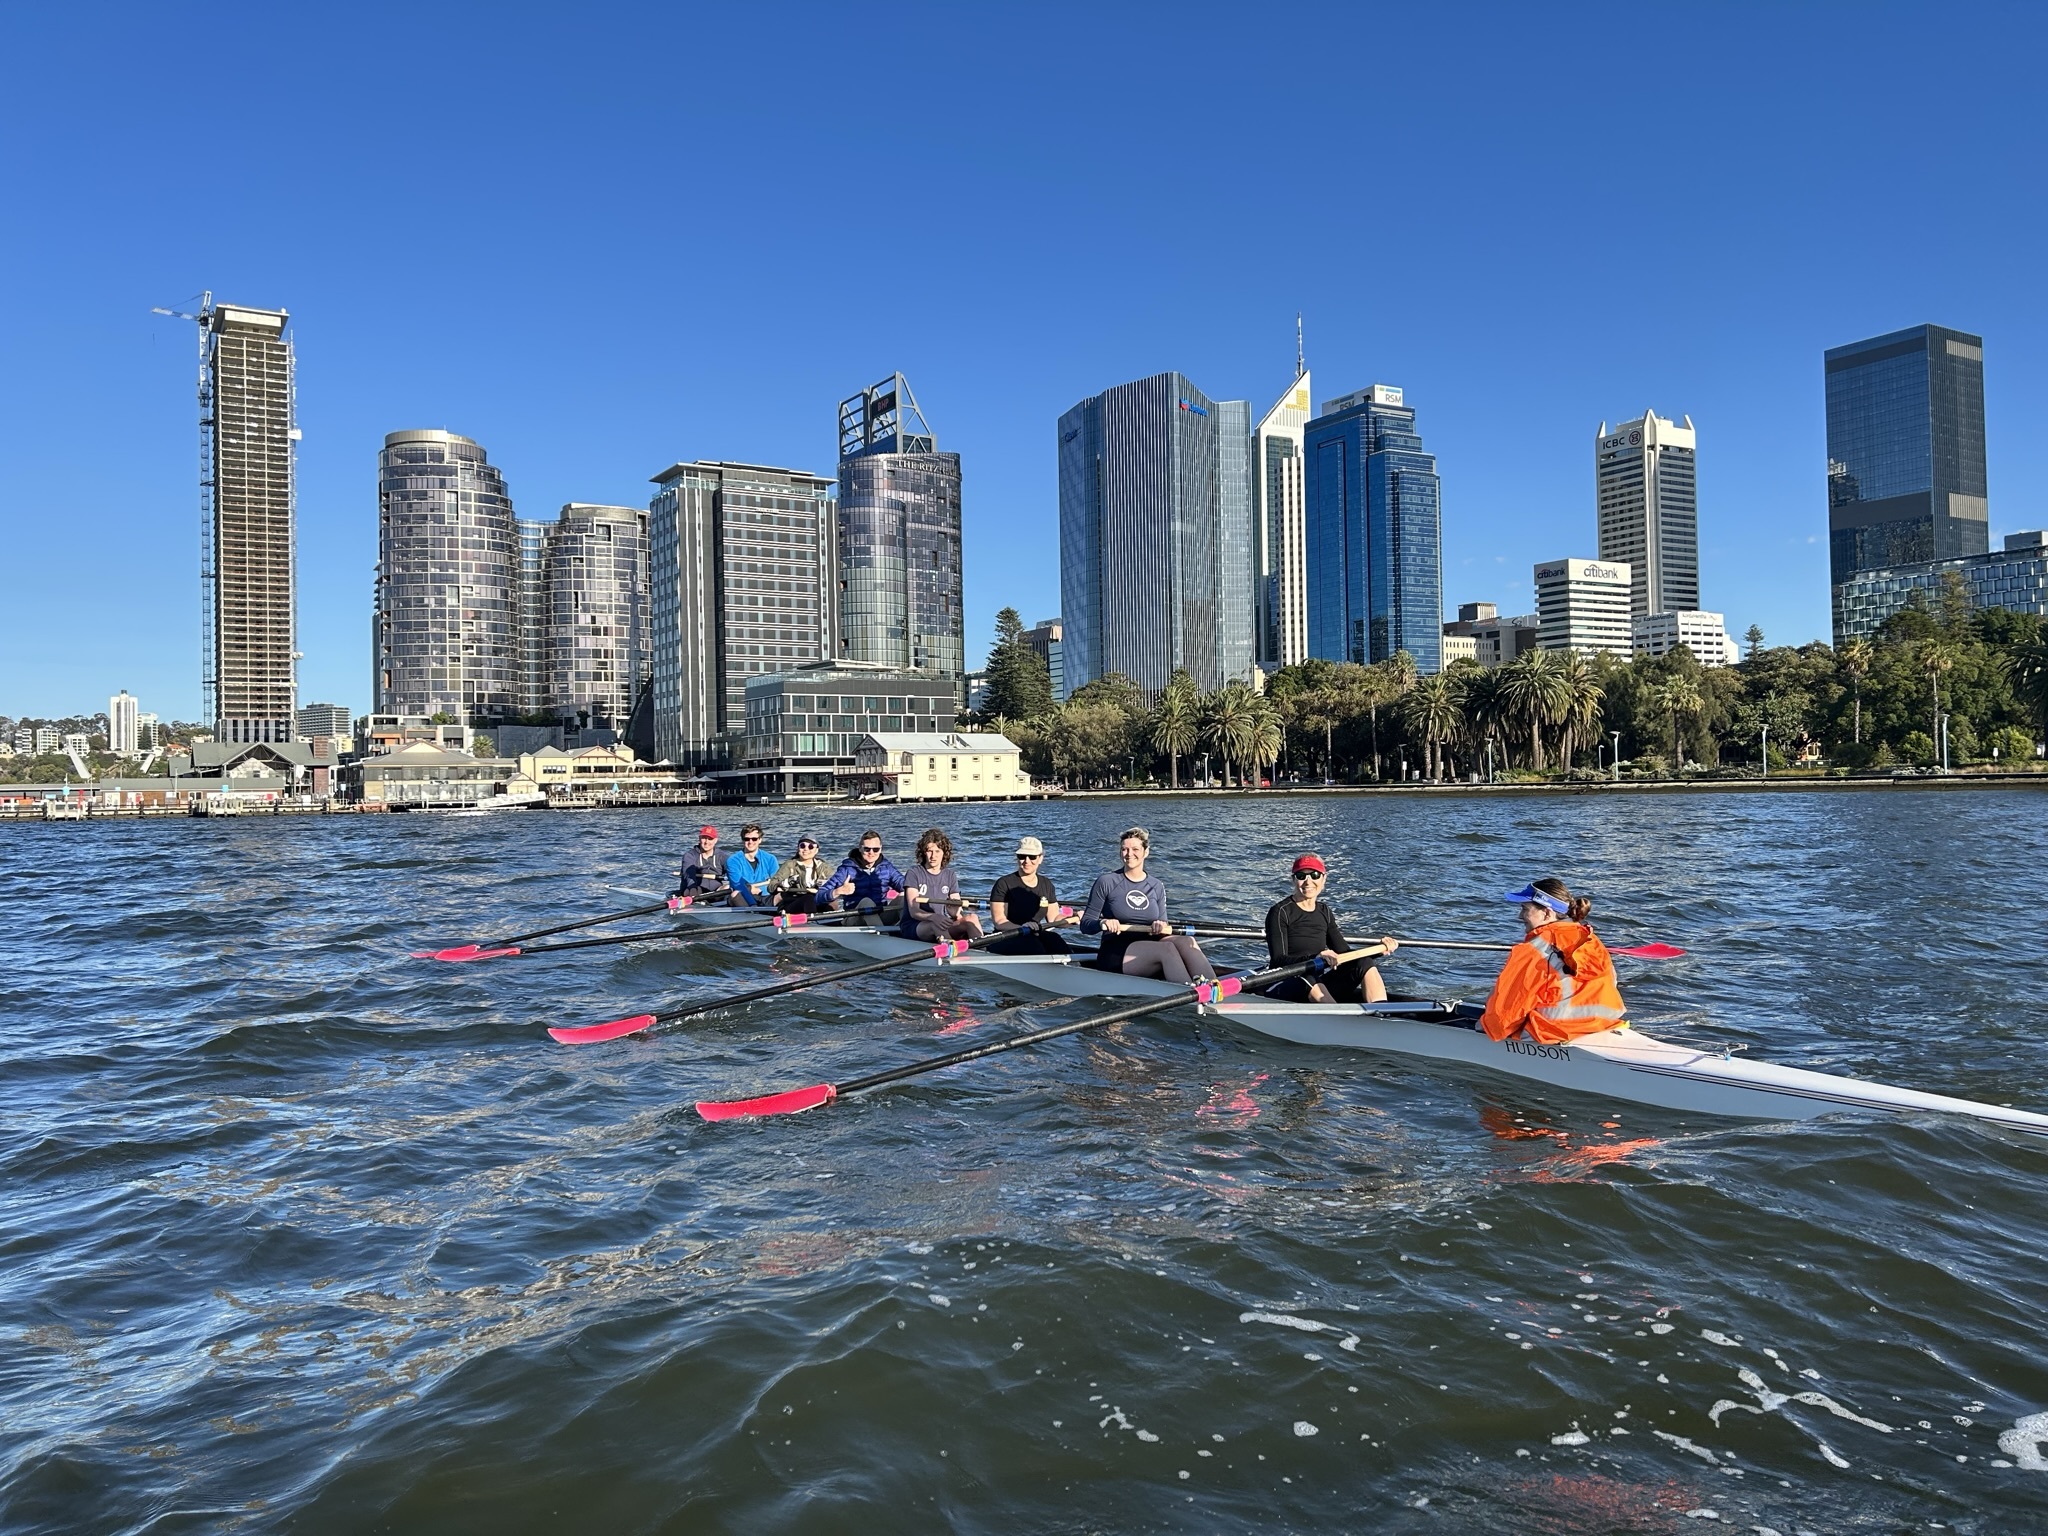 9 people in a row boat on the Swan River, Perth city in the background.